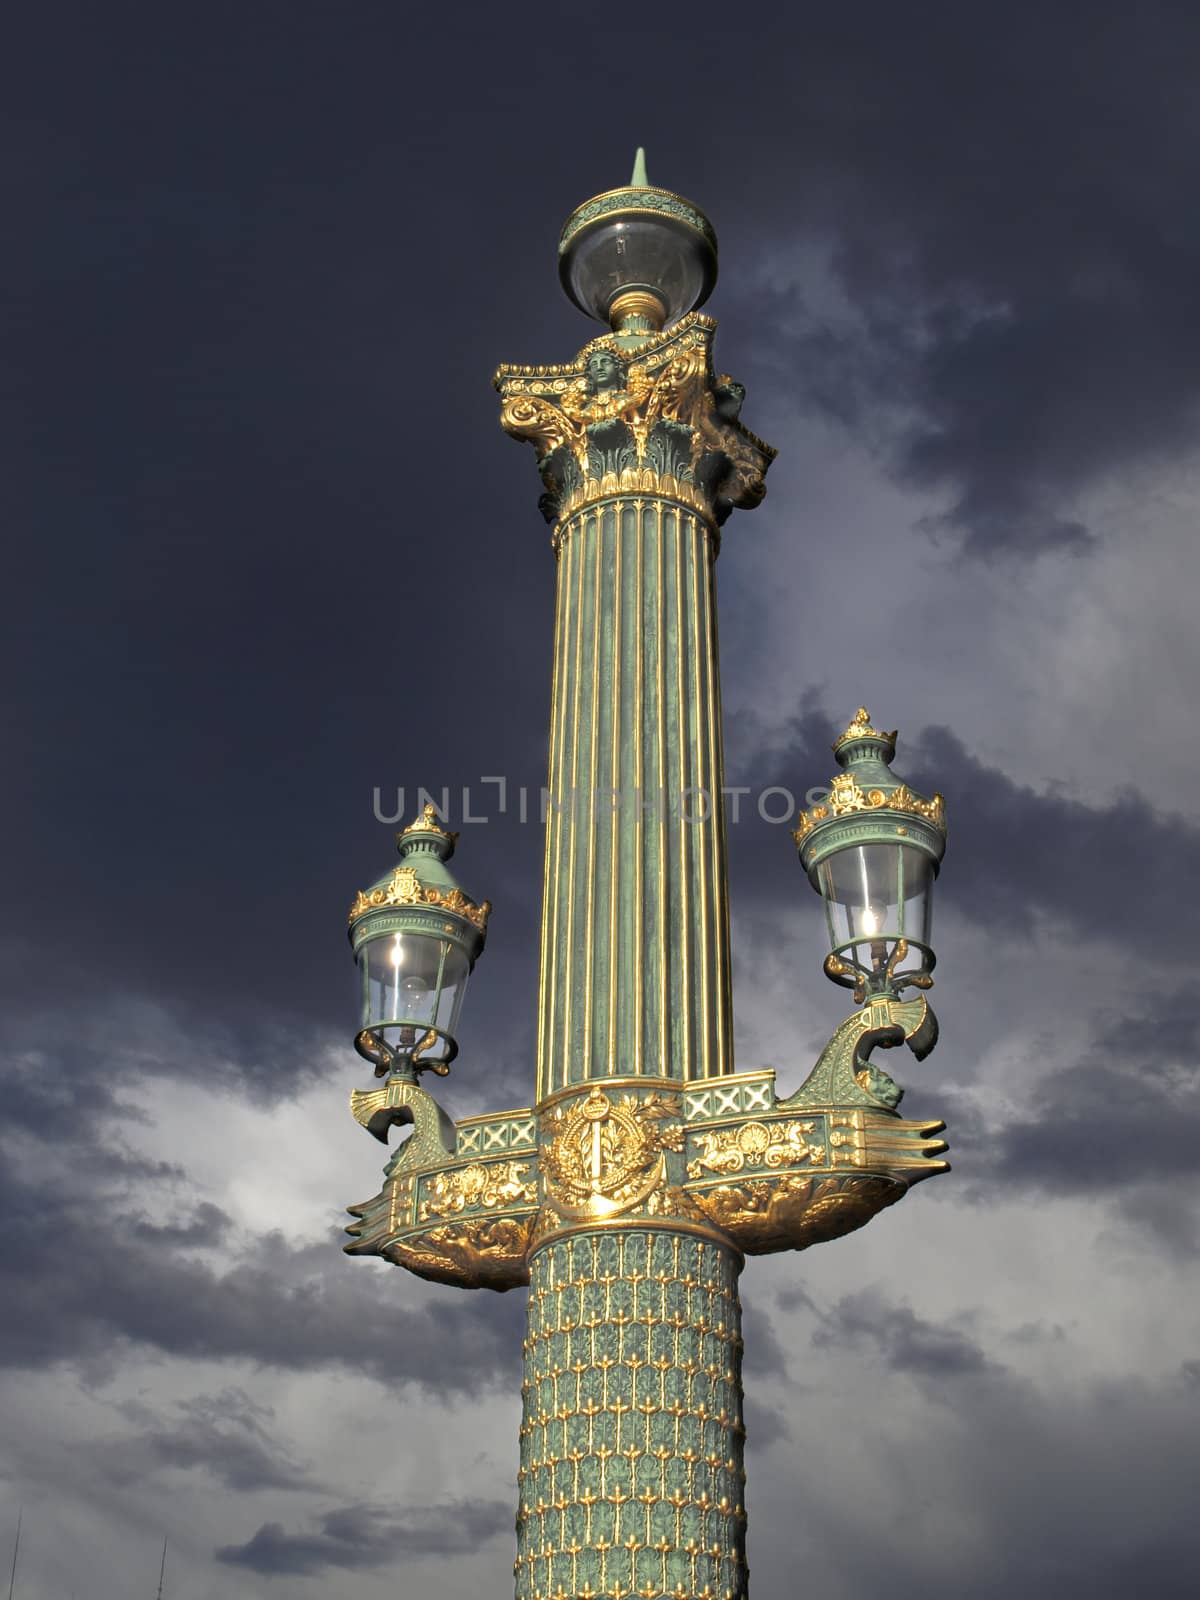 An outdoor golden post lamp at the Concorde square in Paris